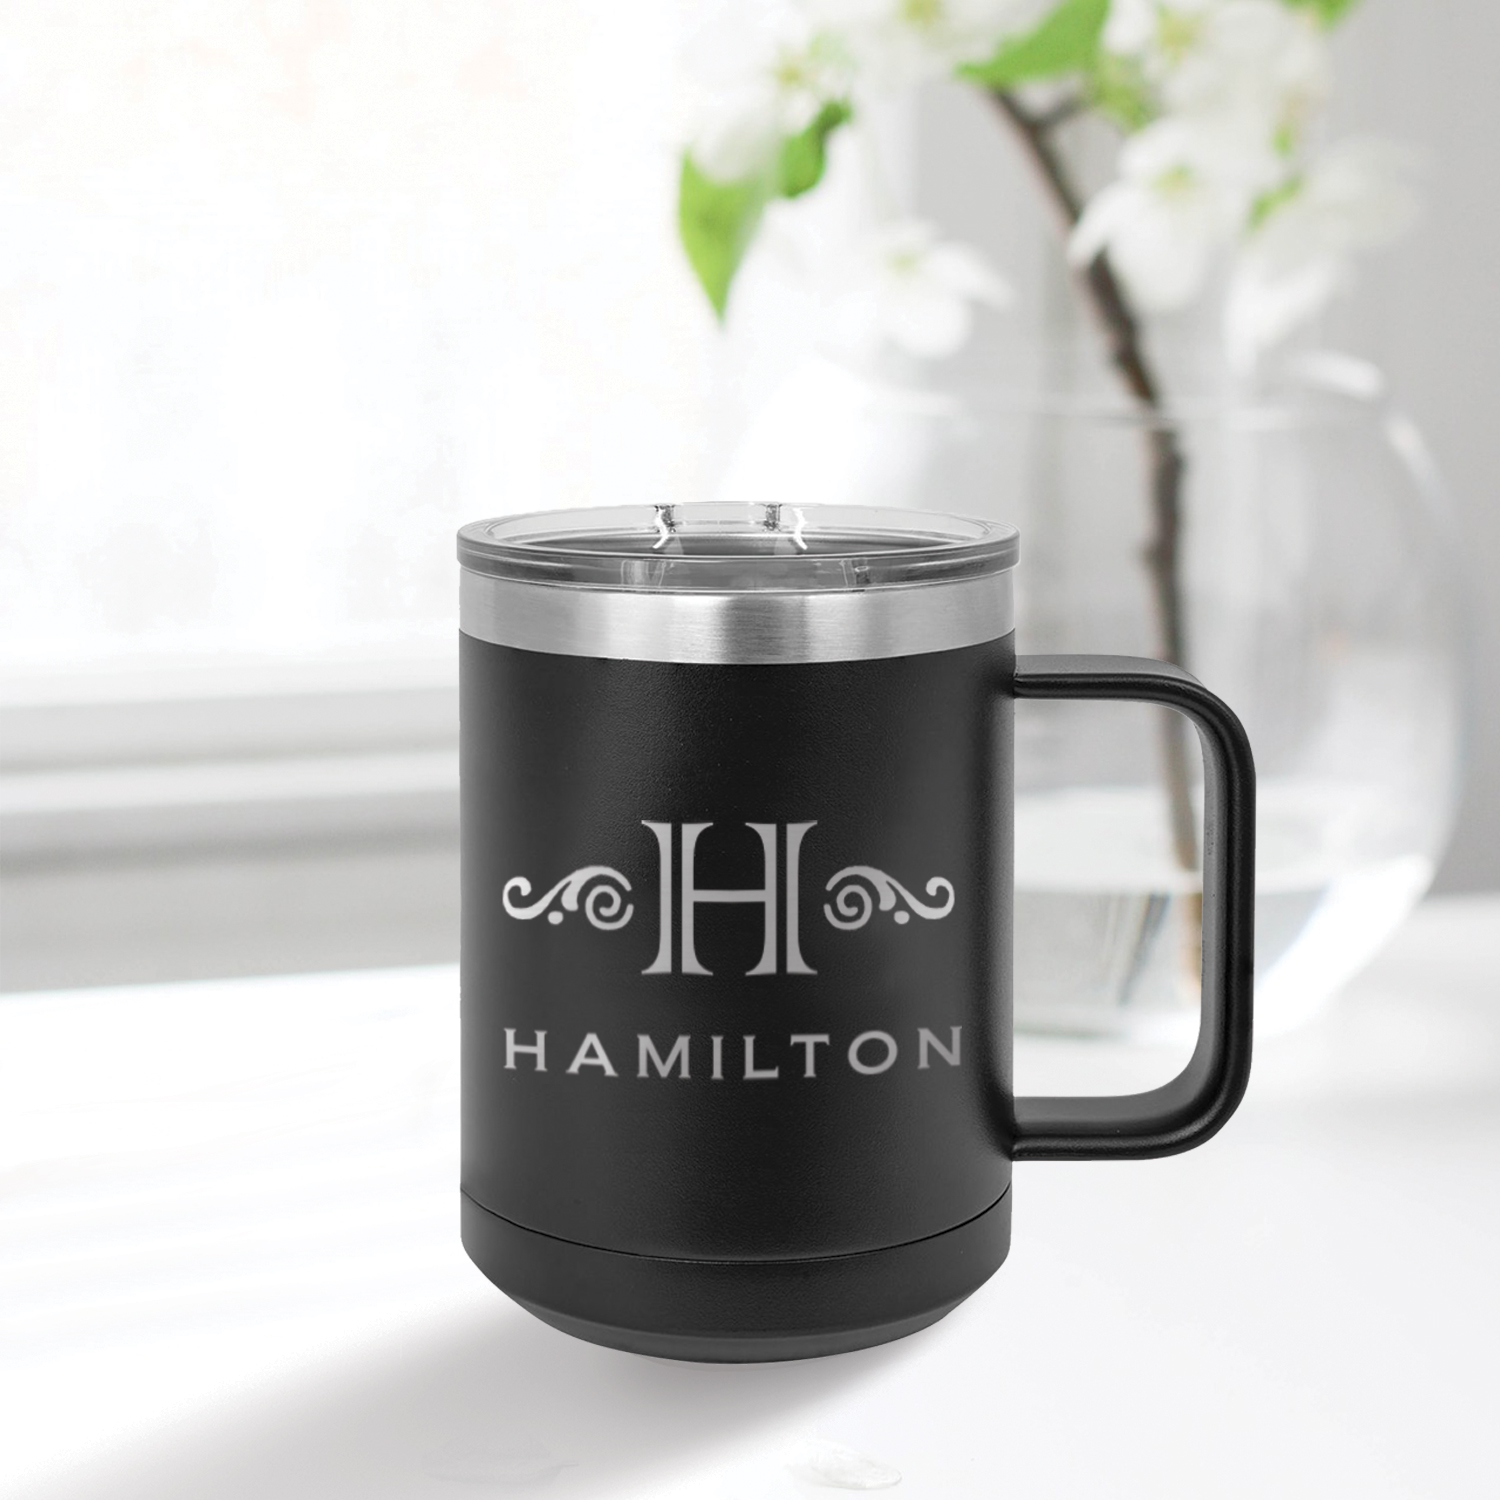 Looking For Coffee - Engraved Stainless Steel Coffee Tumbler, Insulated  Travel Mug, Coffee Cup Gift For Her